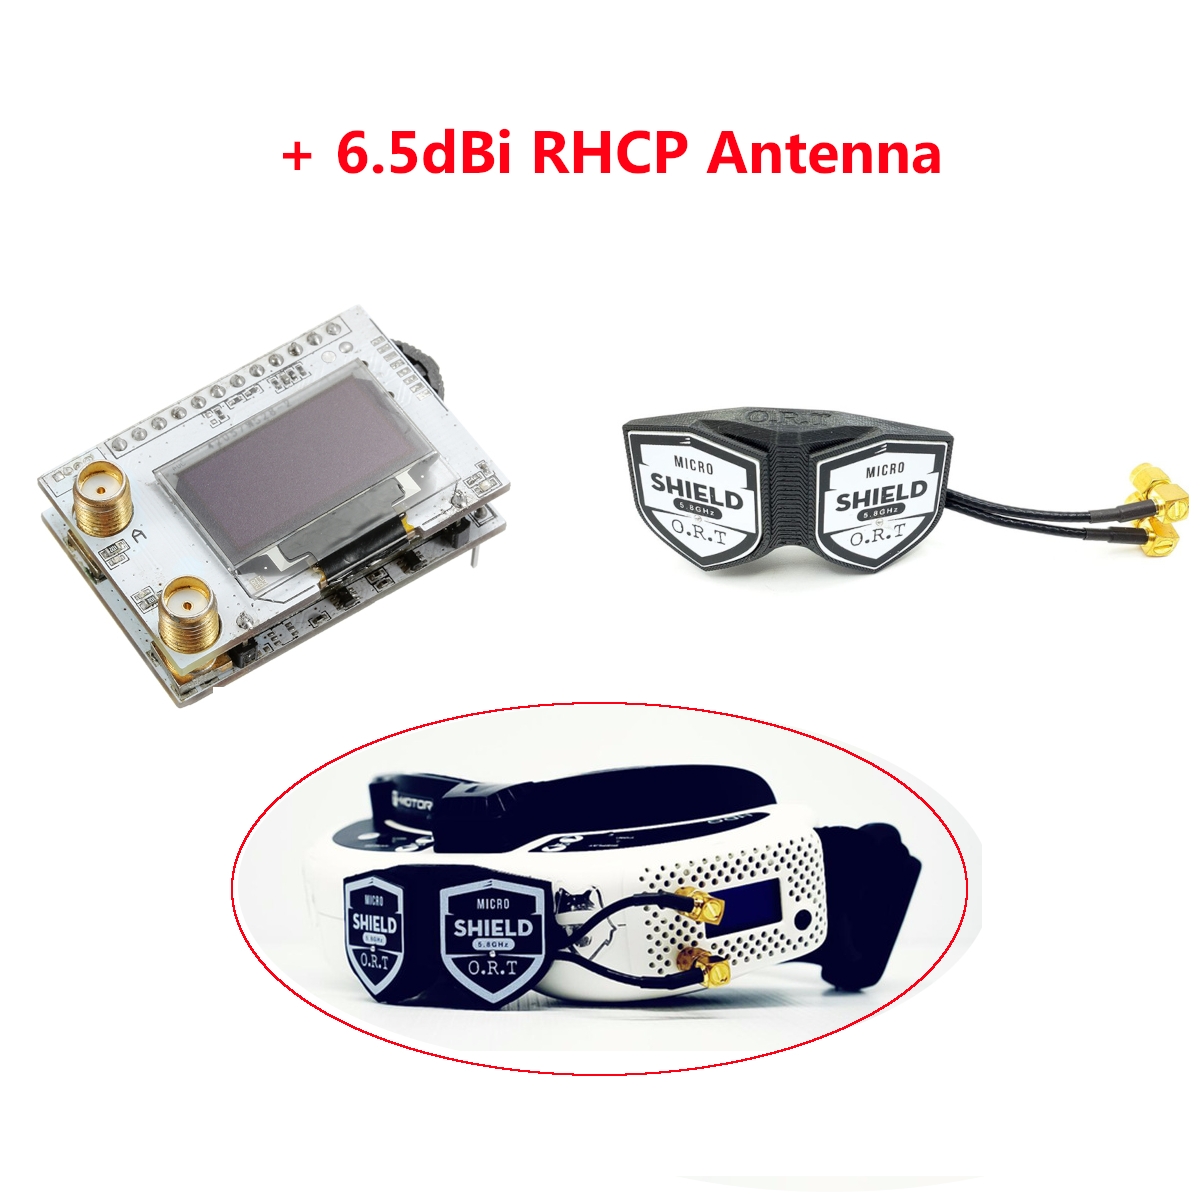 Eachine PRO58 RX Diversity 40CH 5.8G OLED SCAN VRX FPV Receiver SMA with ORT DUAL SHIELD PRO 6.5dBi RHCP Antenna for FatShark Goggles